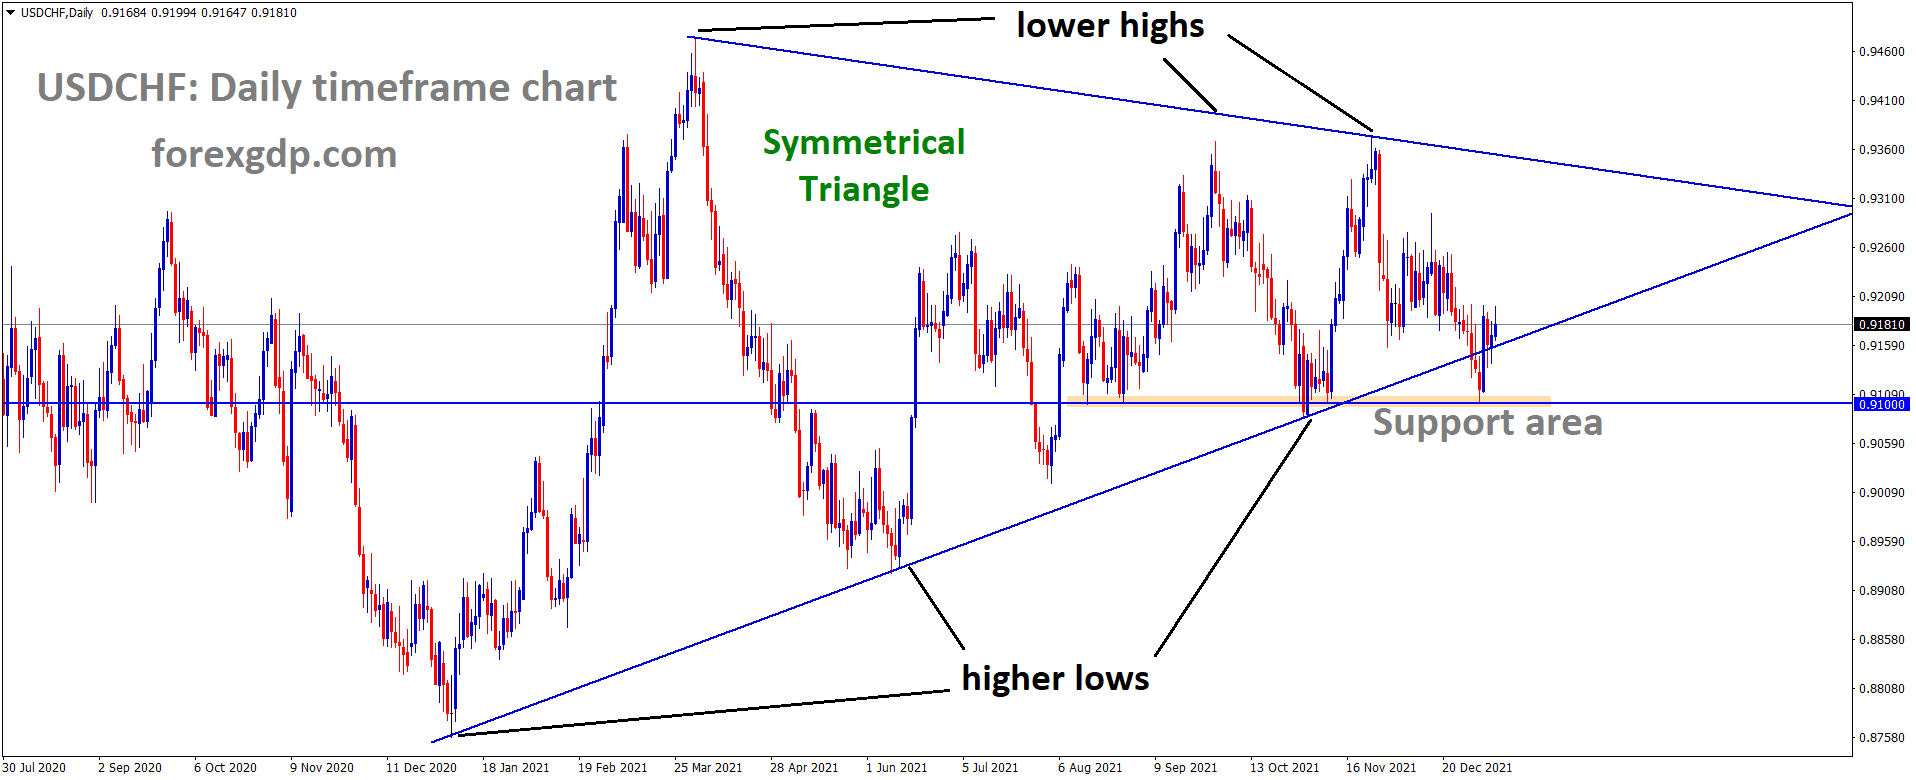 USDCHF is moving in the Symmetrical triangle pattern and the market has rebounded from the horizontal support area of the pattern.